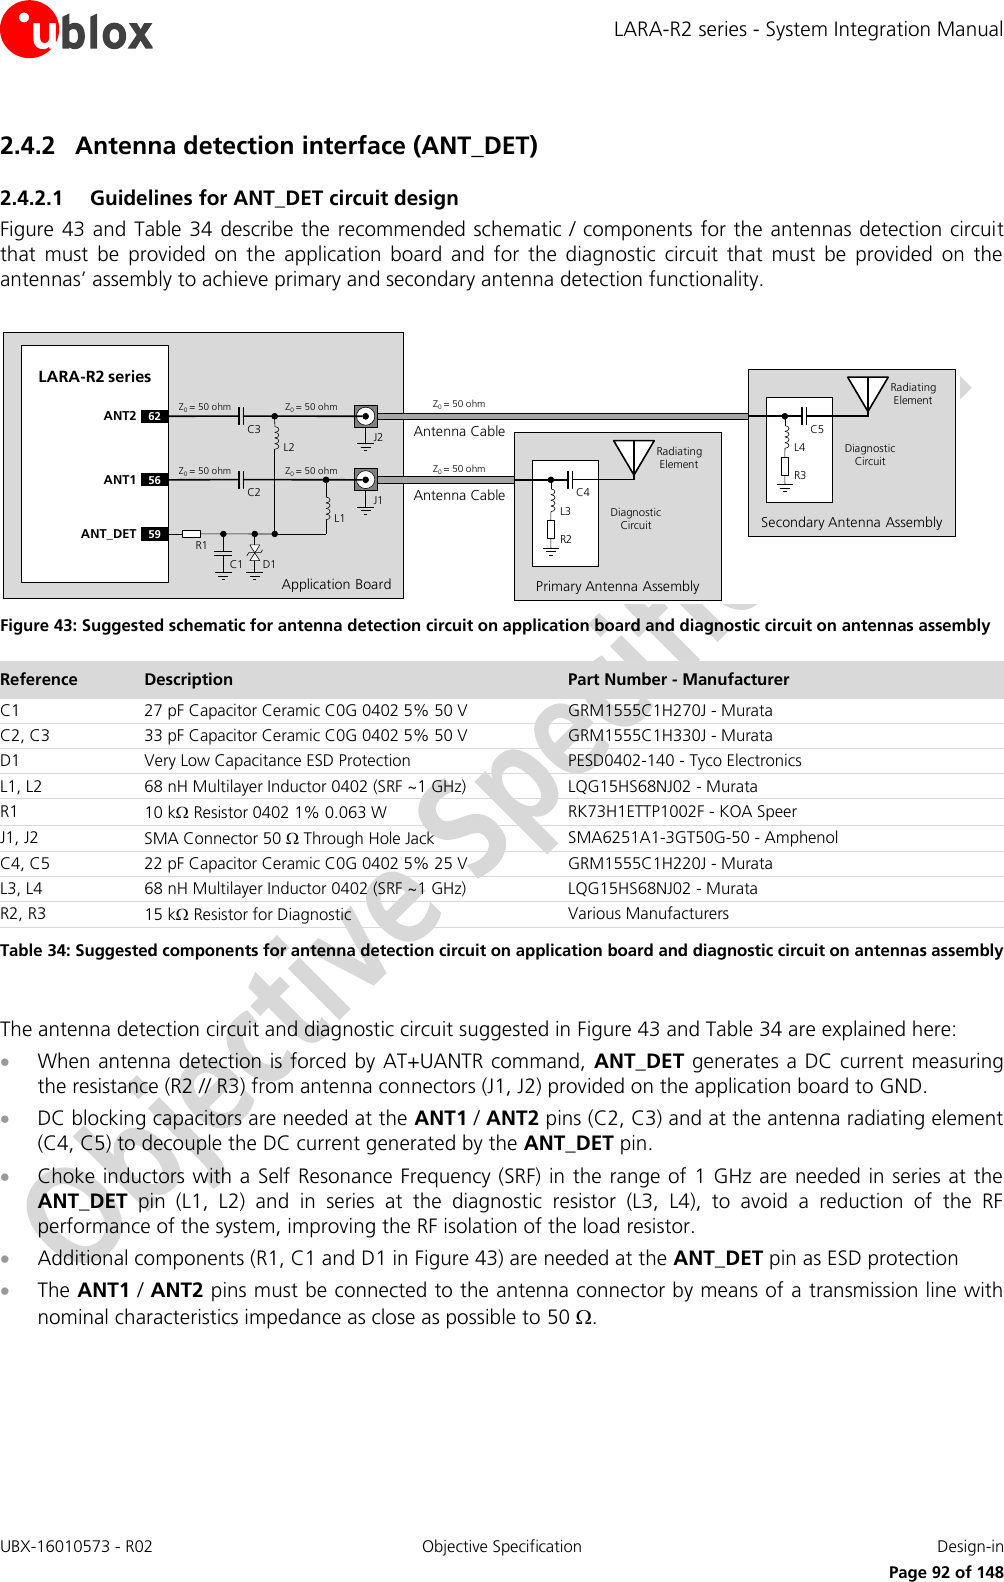 LARA-R2 series - System Integration Manual UBX-16010573 - R02  Objective Specification  Design-in     Page 92 of 148 2.4.2 Antenna detection interface (ANT_DET) 2.4.2.1 Guidelines for ANT_DET circuit design Figure 43 and Table 34  describe the recommended schematic / components for the antennas detection circuit that  must  be  provided  on  the  application  board  and  for  the  diagnostic  circuit  that  must  be  provided  on  the antennas’ assembly to achieve primary and secondary antenna detection functionality.  Application BoardAntenna CableLARA-R2 series56ANT159ANT_DET R1C1 D1C2 J1Z0= 50 ohm Z0= 50 ohm Z0= 50 ohmPrimary Antenna AssemblyR2C4L3Radiating ElementDiagnostic CircuitL2L1Antenna Cable62ANT2C3 J2Z0= 50 ohm Z0= 50 ohm Z0= 50 ohmSecondary Antenna AssemblyR3C5L4Radiating ElementDiagnostic Circuit Figure 43: Suggested schematic for antenna detection circuit on application board and diagnostic circuit on antennas assembly Reference Description Part Number - Manufacturer C1 27 pF Capacitor Ceramic C0G 0402 5% 50 V GRM1555C1H270J - Murata C2, C3 33 pF Capacitor Ceramic C0G 0402 5% 50 V GRM1555C1H330J - Murata D1 Very Low Capacitance ESD Protection PESD0402-140 - Tyco Electronics L1, L2 68 nH Multilayer Inductor 0402 (SRF ~1 GHz) LQG15HS68NJ02 - Murata R1 10 k Resistor 0402 1% 0.063 W RK73H1ETTP1002F - KOA Speer J1, J2 SMA Connector 50  Through Hole Jack SMA6251A1-3GT50G-50 - Amphenol C4, C5 22 pF Capacitor Ceramic C0G 0402 5% 25 V  GRM1555C1H220J - Murata L3, L4 68 nH Multilayer Inductor 0402 (SRF ~1 GHz) LQG15HS68NJ02 - Murata R2, R3 15 k Resistor for Diagnostic Various Manufacturers Table 34: Suggested components for antenna detection circuit on application board and diagnostic circuit on antennas assembly  The antenna detection circuit and diagnostic circuit suggested in Figure 43 and Table 34 are explained here:  When antenna detection is forced by AT+UANTR command,  ANT_DET generates a DC current measuring the resistance (R2 // R3) from antenna connectors (J1, J2) provided on the application board to GND.  DC blocking capacitors are needed at the ANT1 / ANT2 pins (C2, C3) and at the antenna radiating element (C4, C5) to decouple the DC current generated by the ANT_DET pin.  Choke inductors with a Self Resonance Frequency (SRF) in the range of 1 GHz are needed in series at the ANT_DET  pin  (L1,  L2)  and  in  series  at  the  diagnostic  resistor  (L3,  L4),  to  avoid  a  reduction  of  the  RF performance of the system, improving the RF isolation of the load resistor.   Additional components (R1, C1 and D1 in Figure 43) are needed at the ANT_DET pin as ESD protection  The ANT1 / ANT2 pins must be connected to the antenna connector by means of a transmission line with nominal characteristics impedance as close as possible to 50 .  